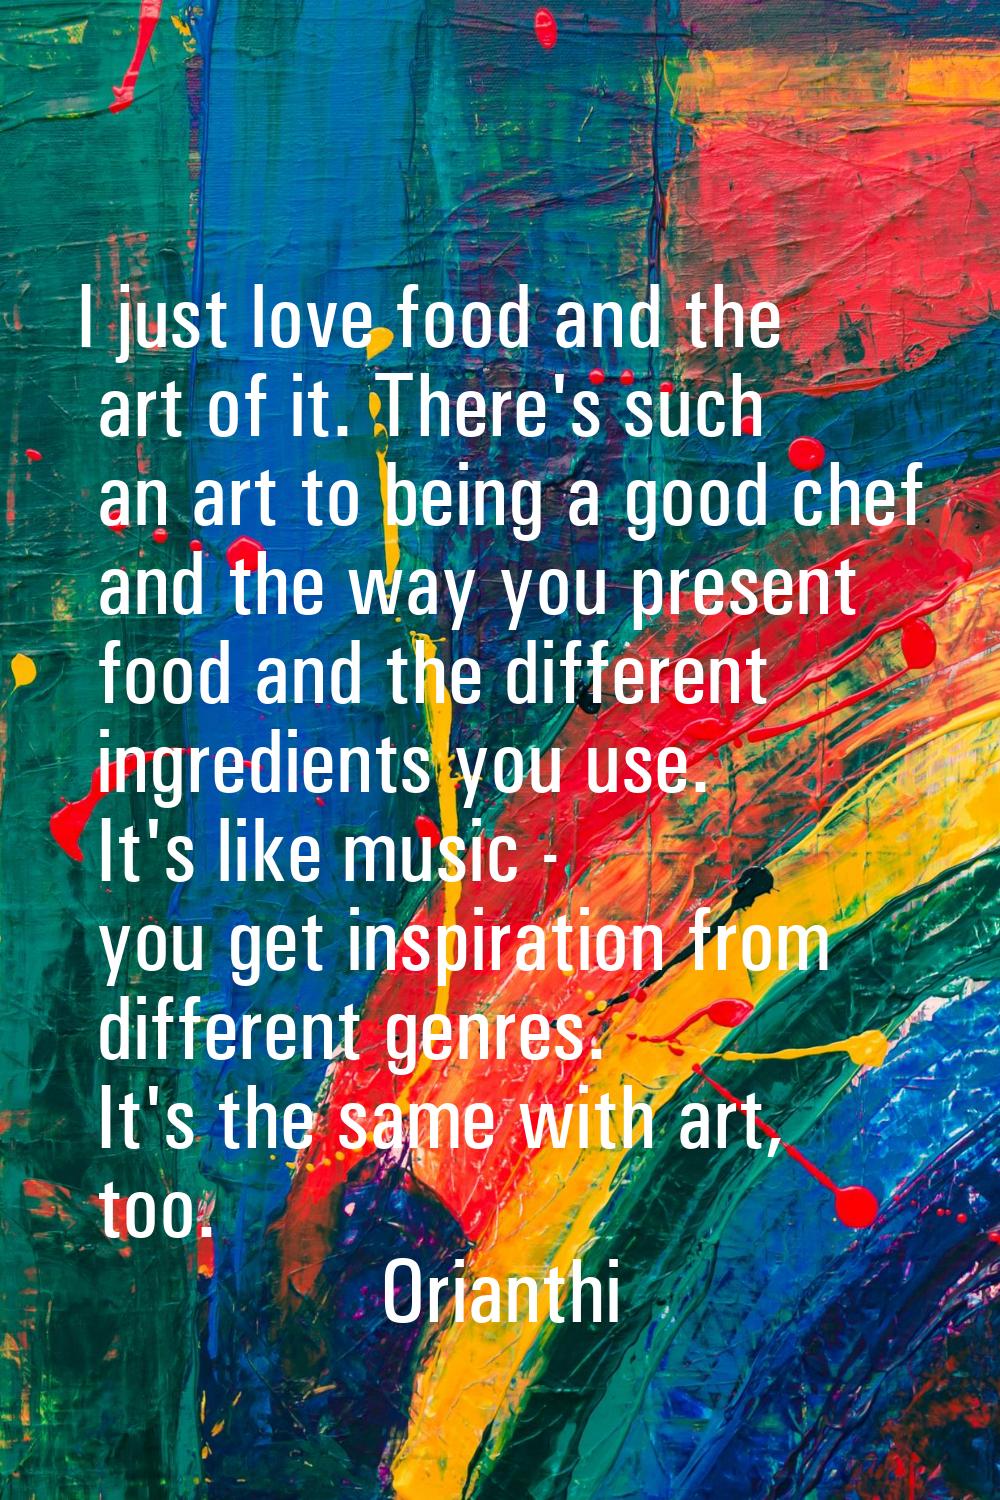 I just love food and the art of it. There's such an art to being a good chef and the way you presen